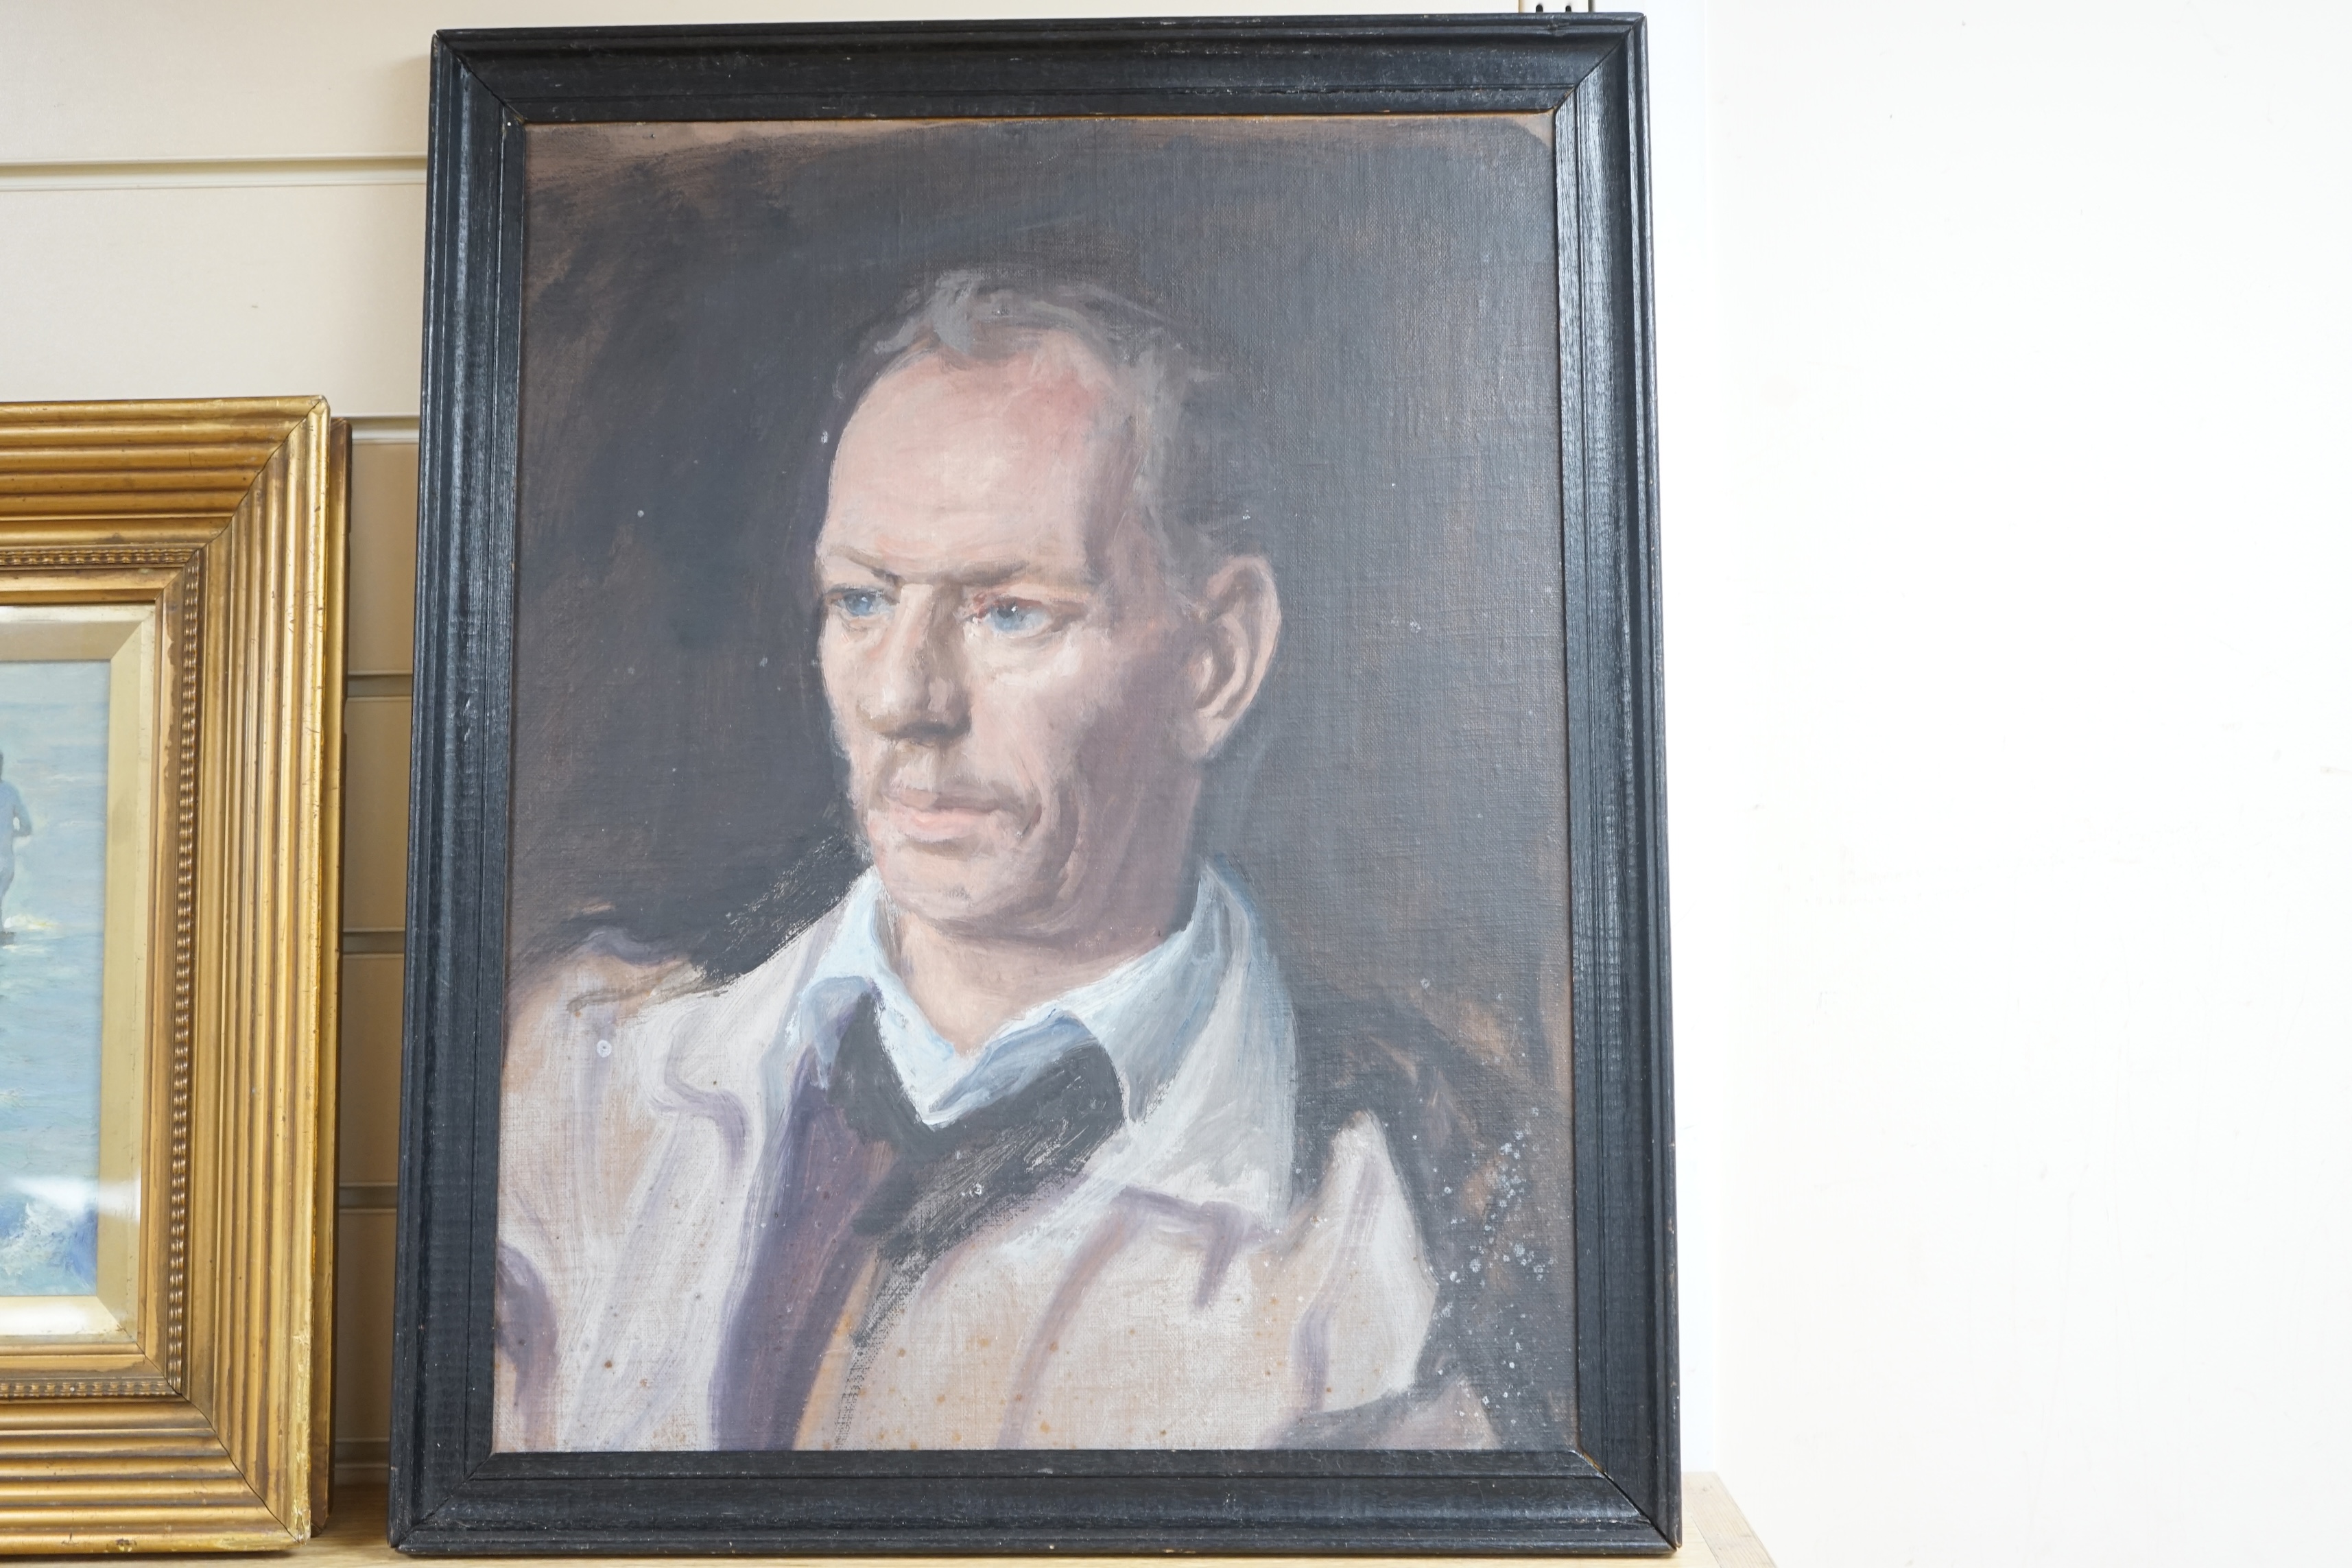 20th century, oil on board, Head and shoulders portrait of a man, unsigned, 49.5 x 39cm. Condition - fair